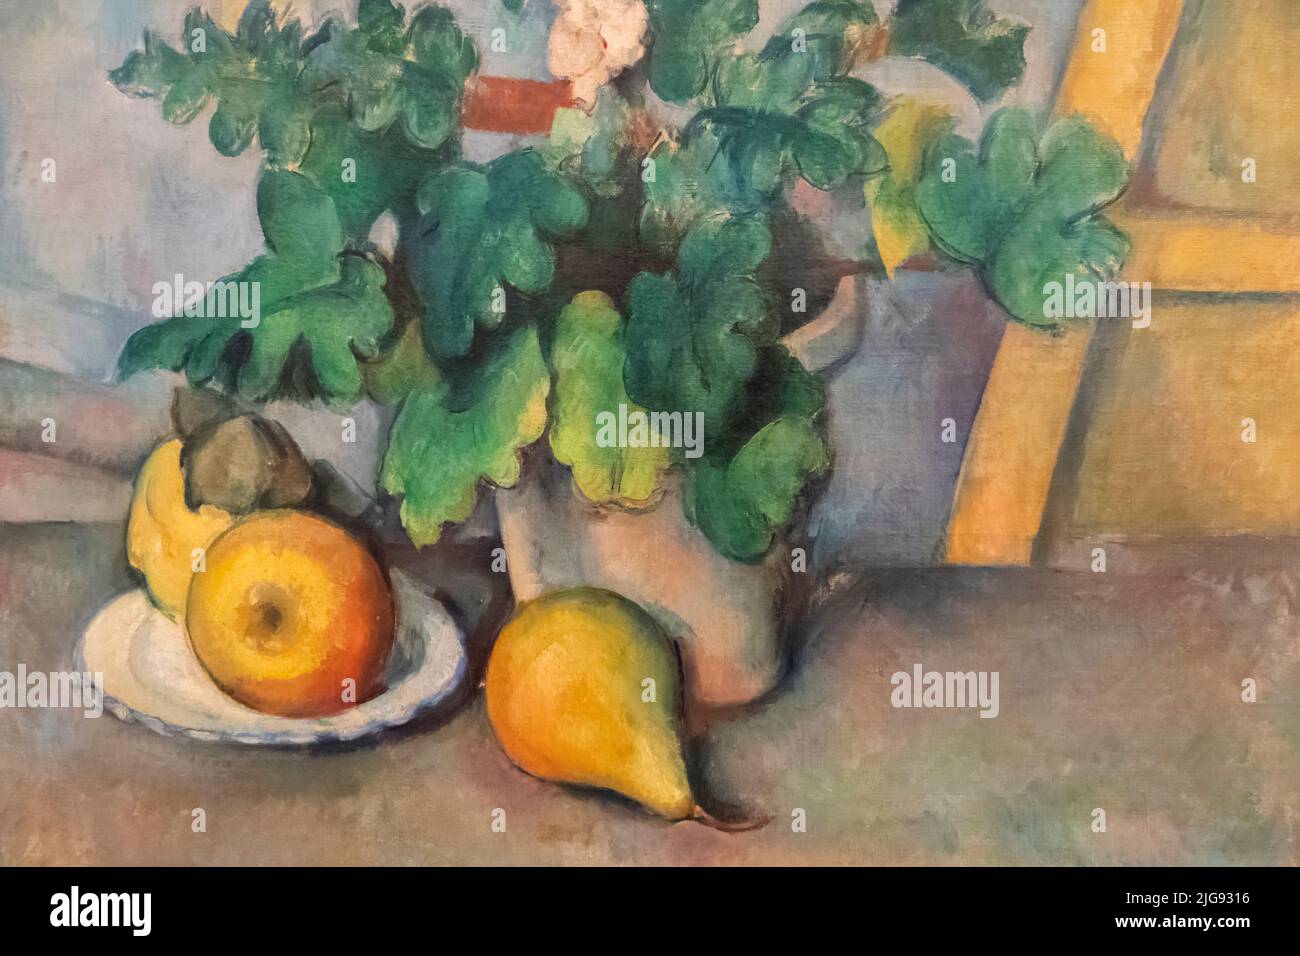 Inghilterra, Londra, Somerset House, The Courtauld Gallery, dipinto dal titolo 'Pot of Flowers and Fruit' di Paul Cezanne datato 1888 Foto Stock